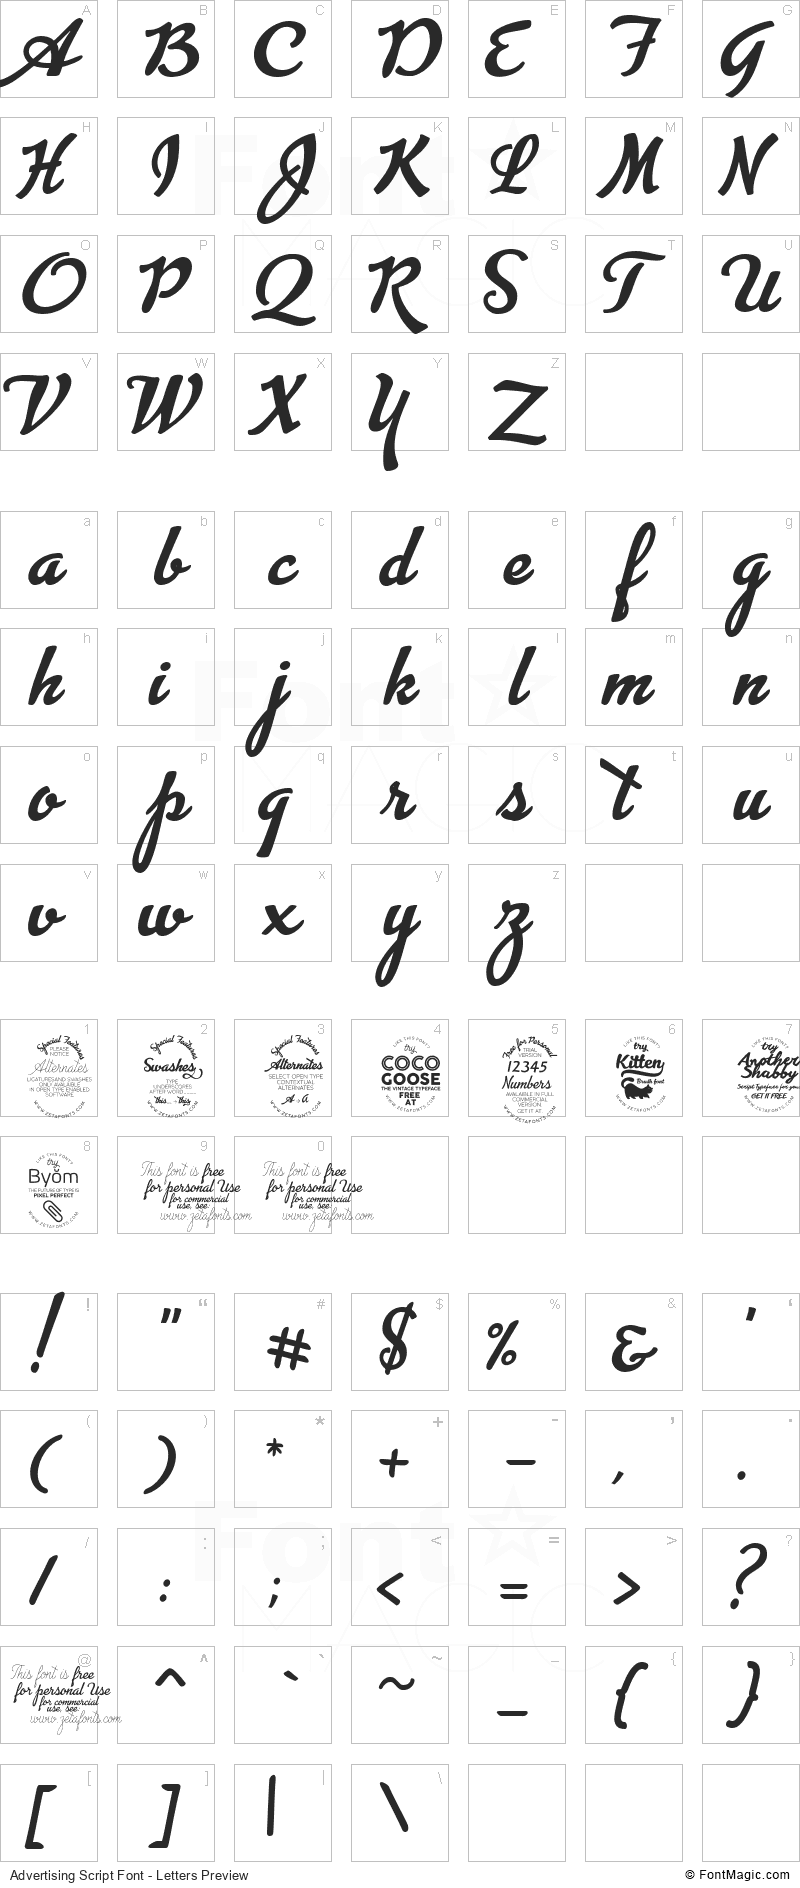 Advertising Script Font - All Latters Preview Chart